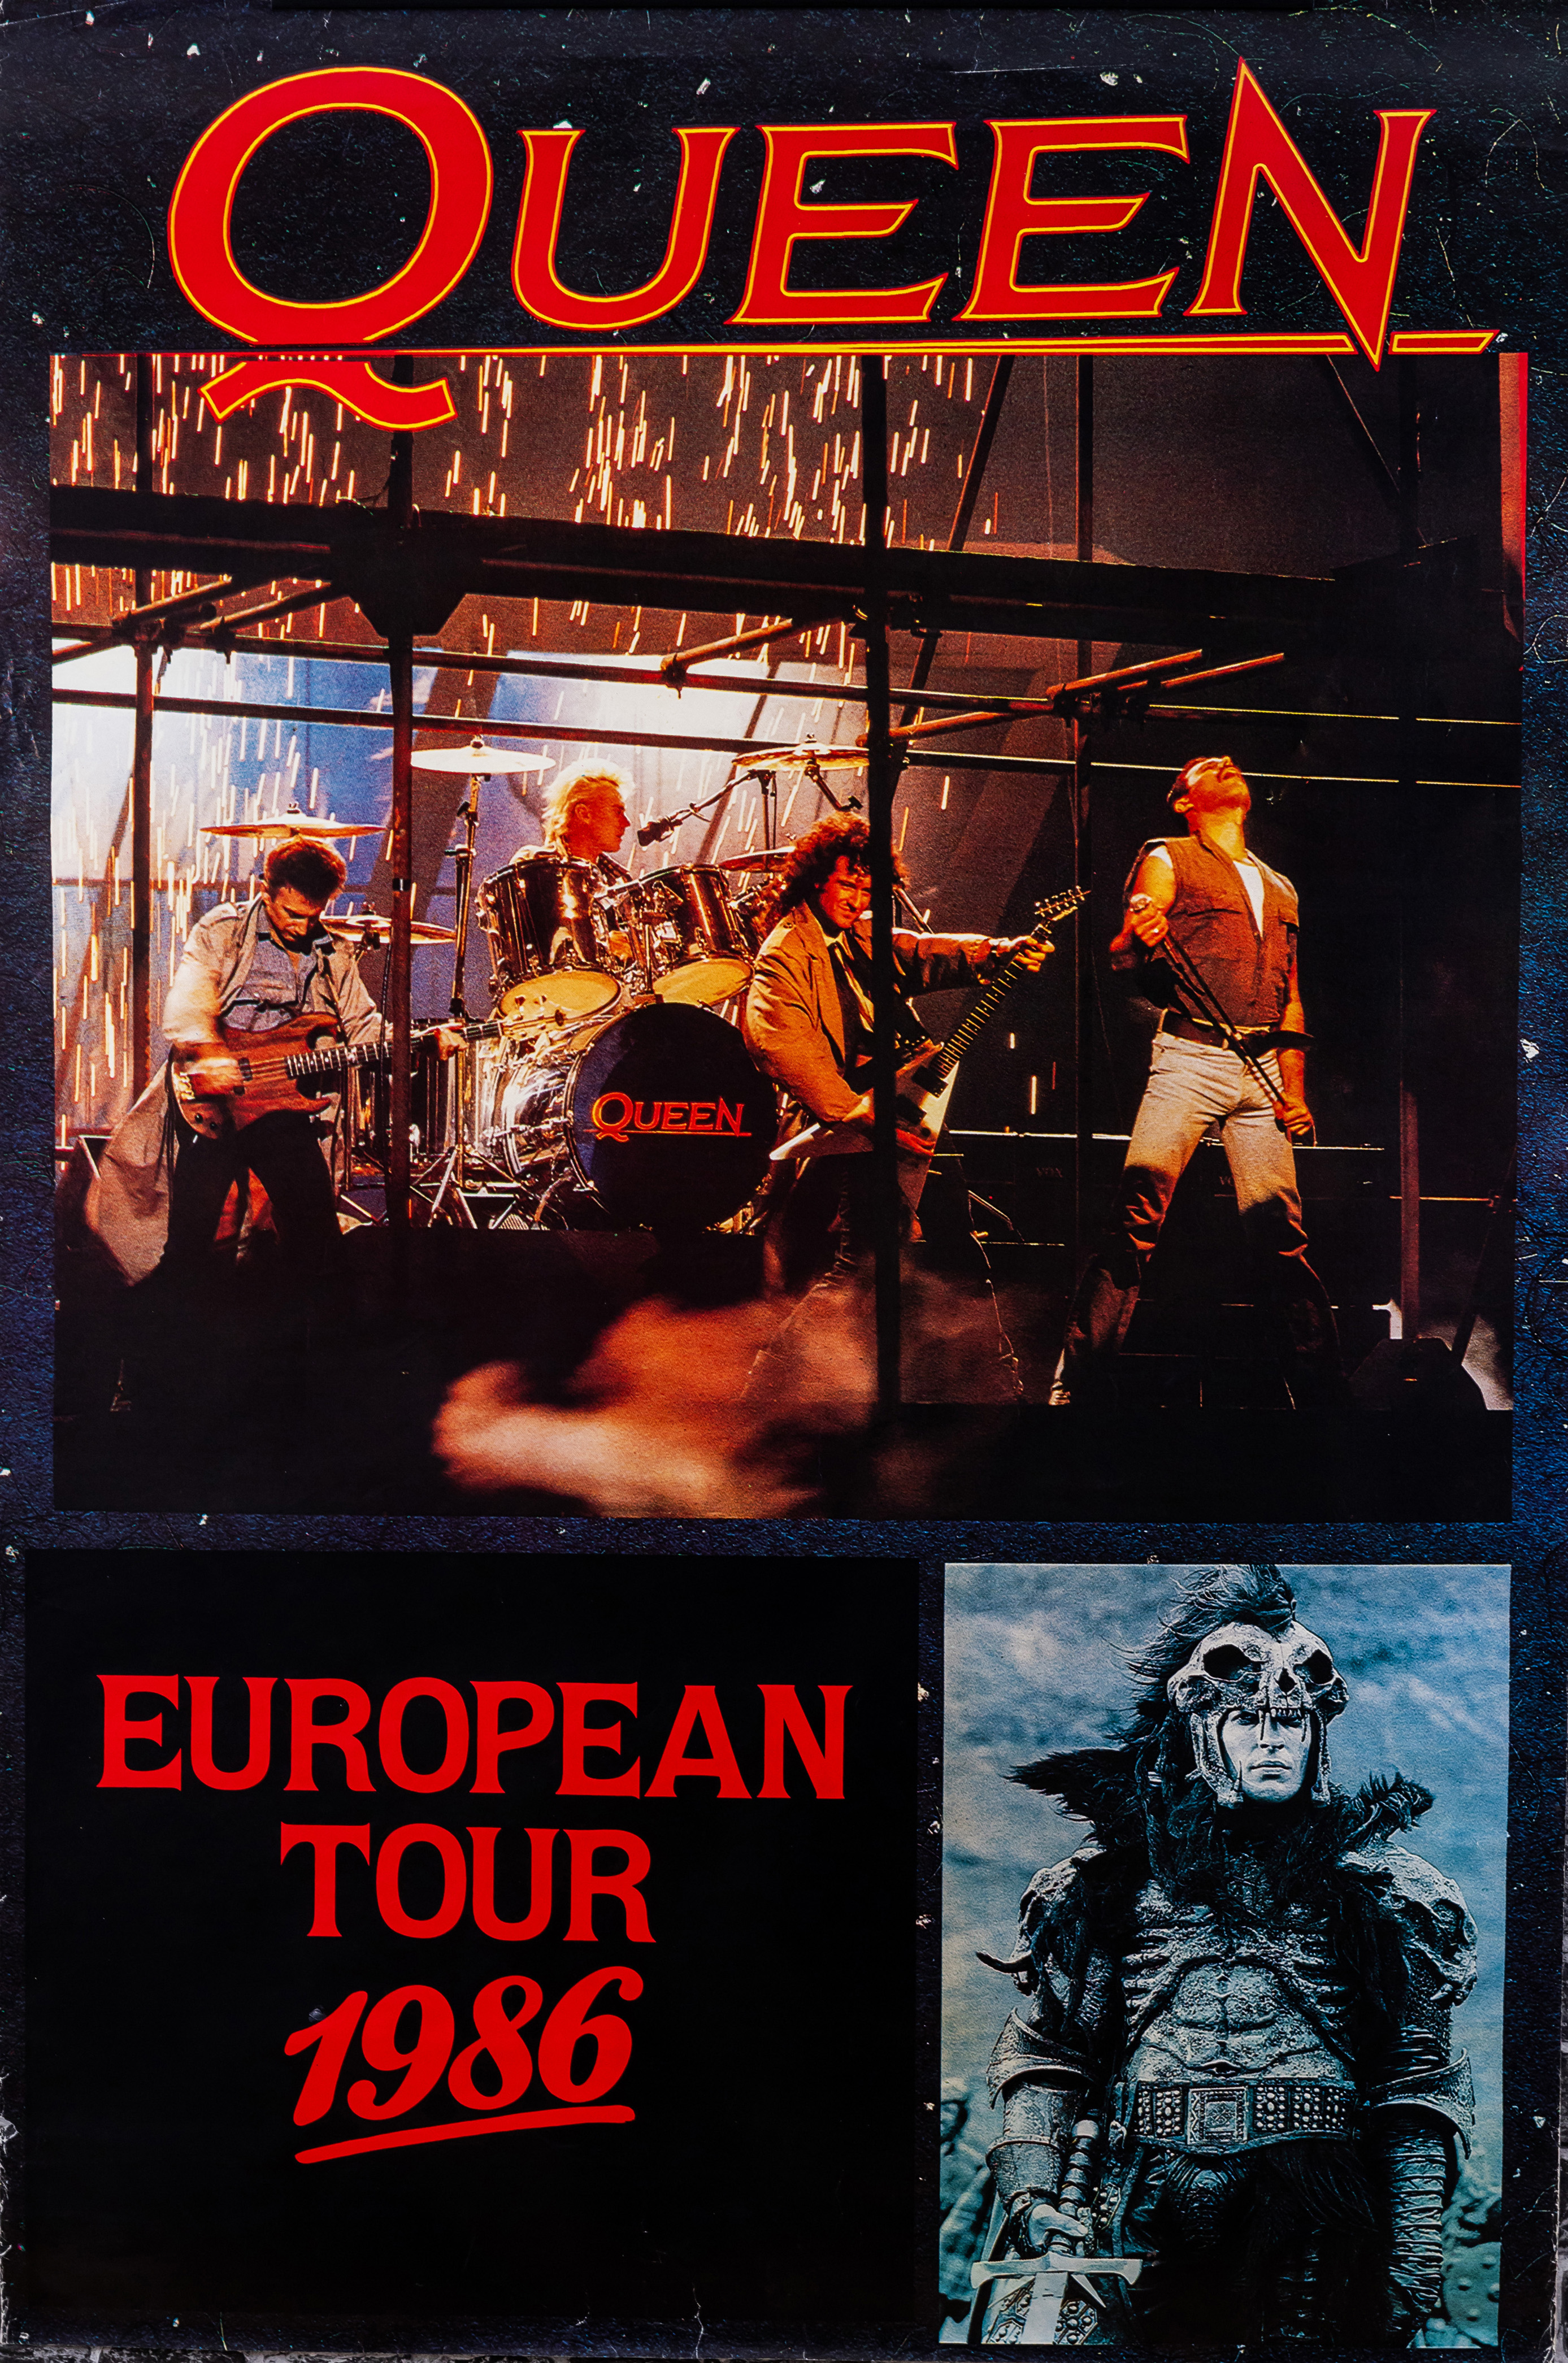 Unofficial poster for the Magic tour (1986)